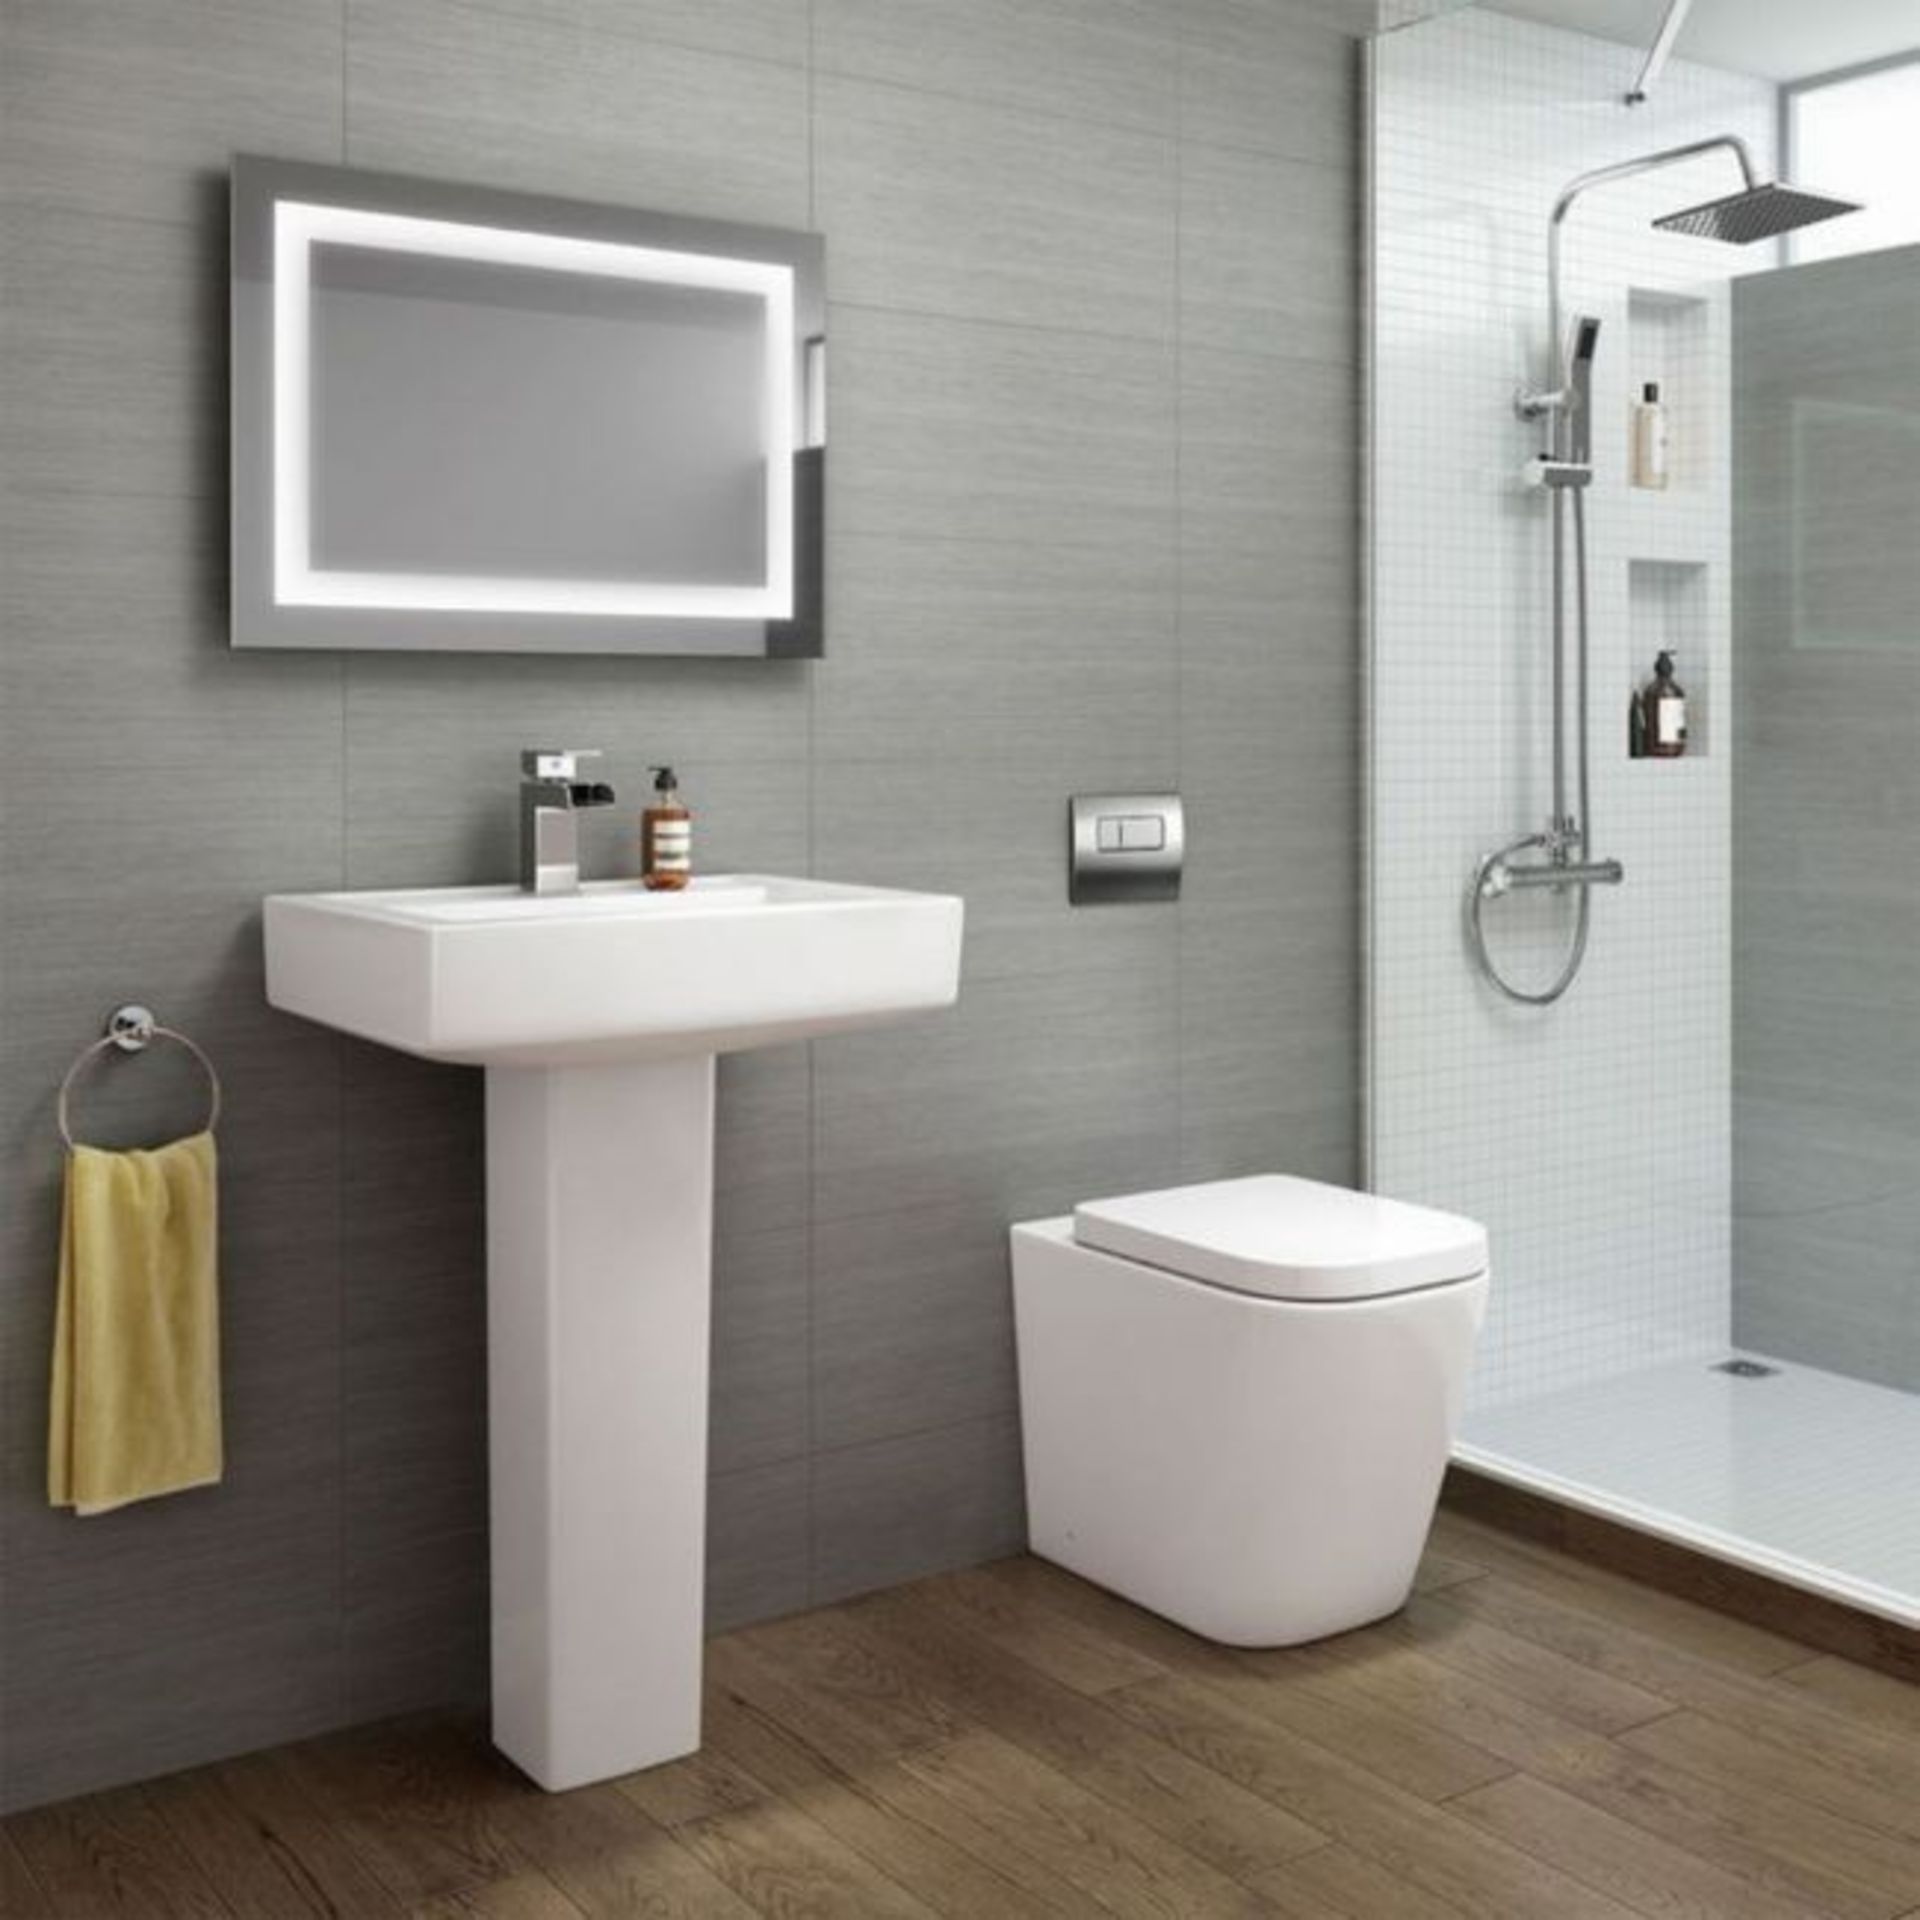 New & Boxed Florence Rimless Back to Wall Toilet inc' Luxury Soft Close Seat. RRP £349.99 each... - Image 2 of 2